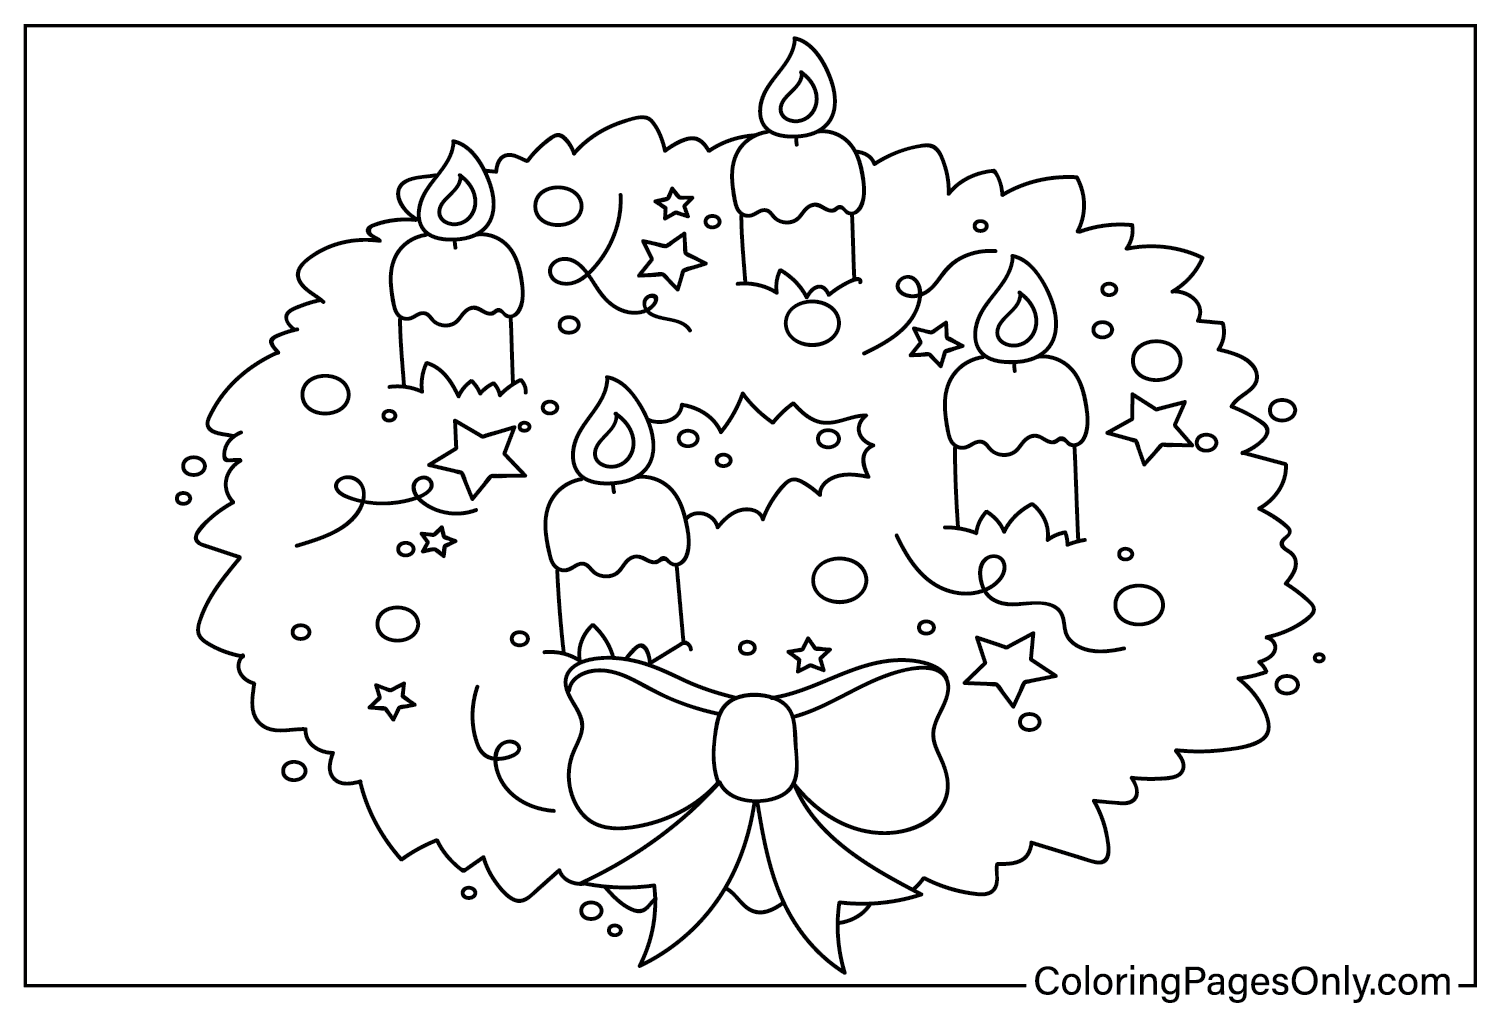 Advent Wreath Coloring Pages to for Kids from Advent Wreath